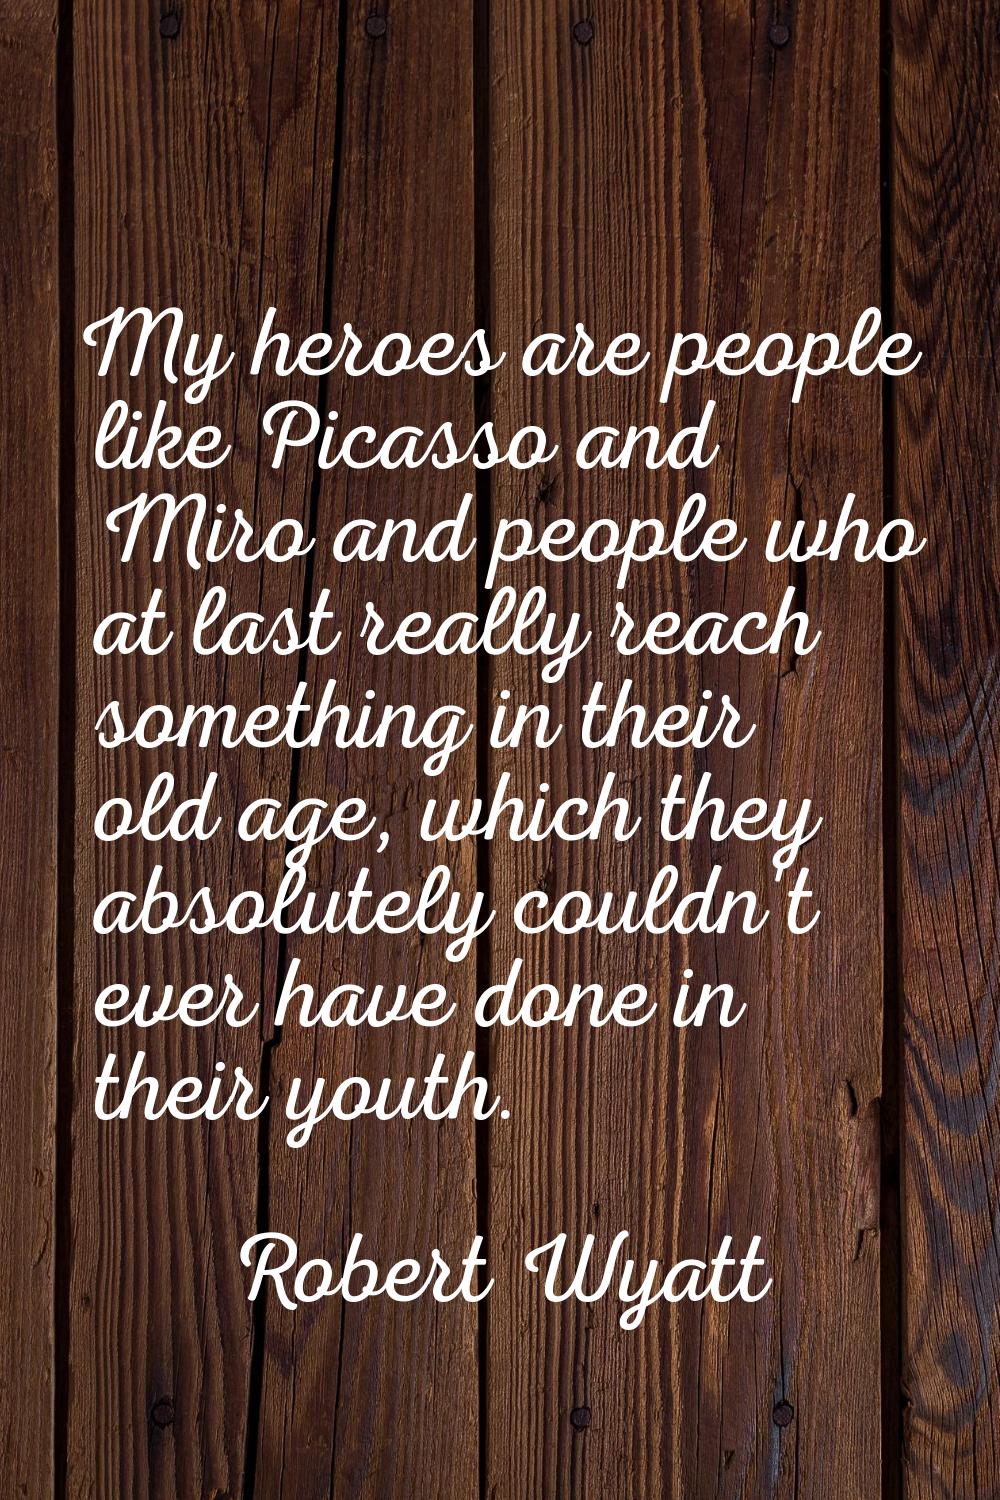 My heroes are people like Picasso and Miro and people who at last really reach something in their o